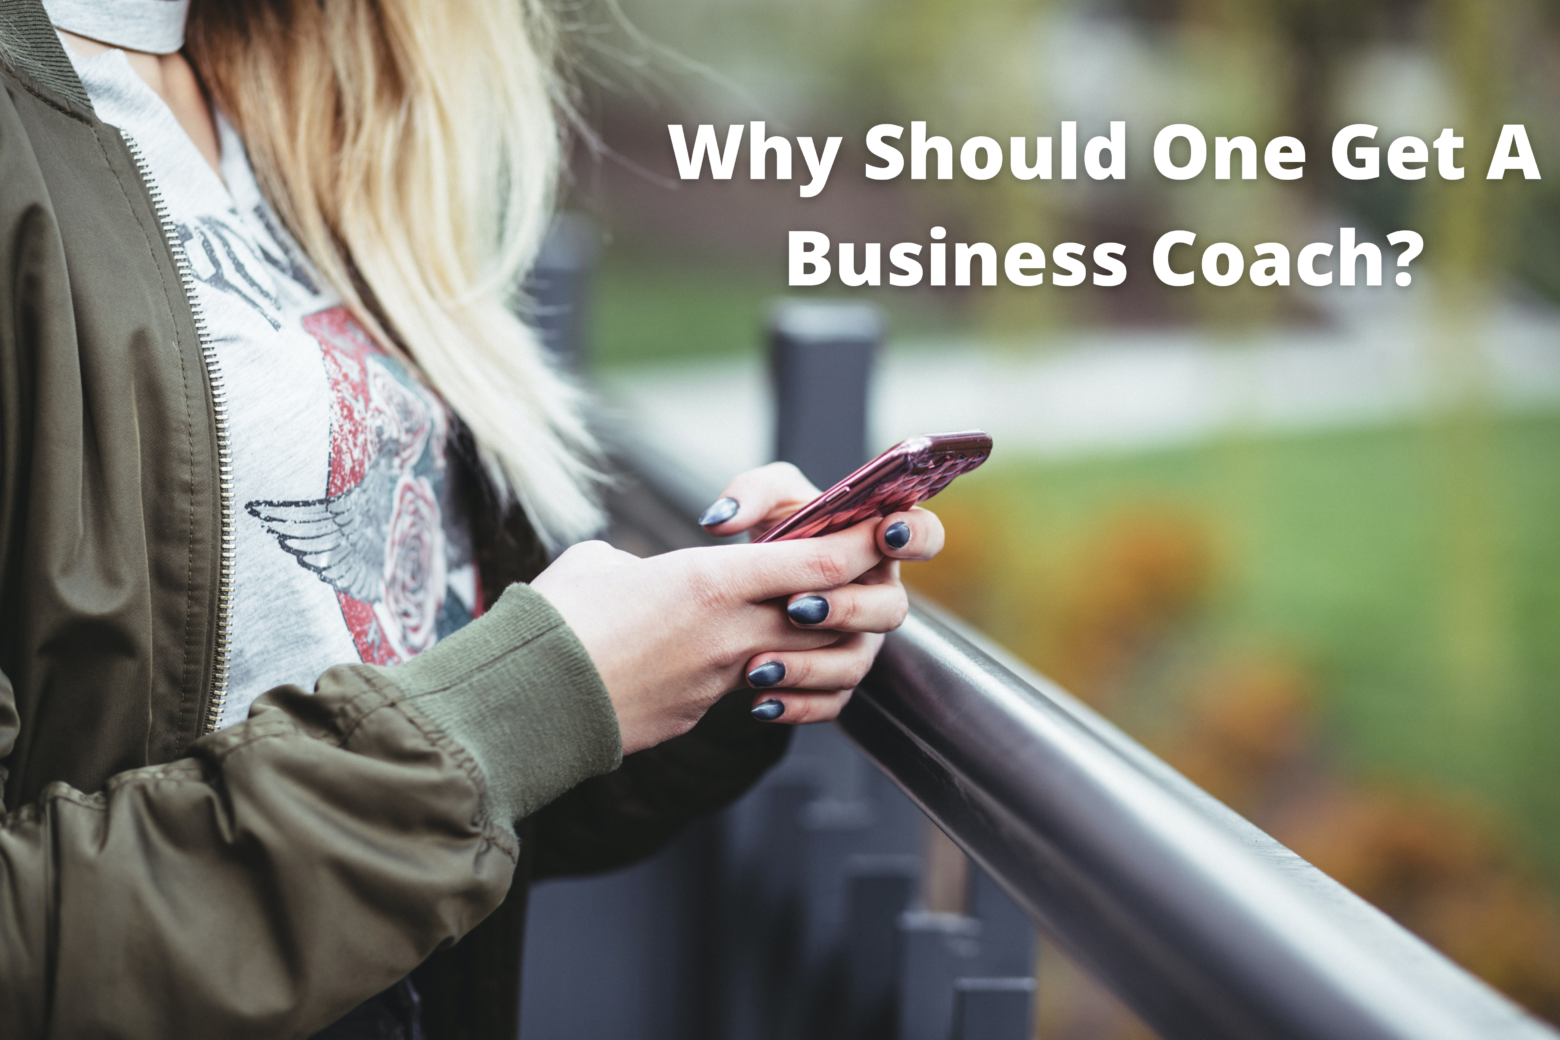 Why Should One Get A Business Coach?